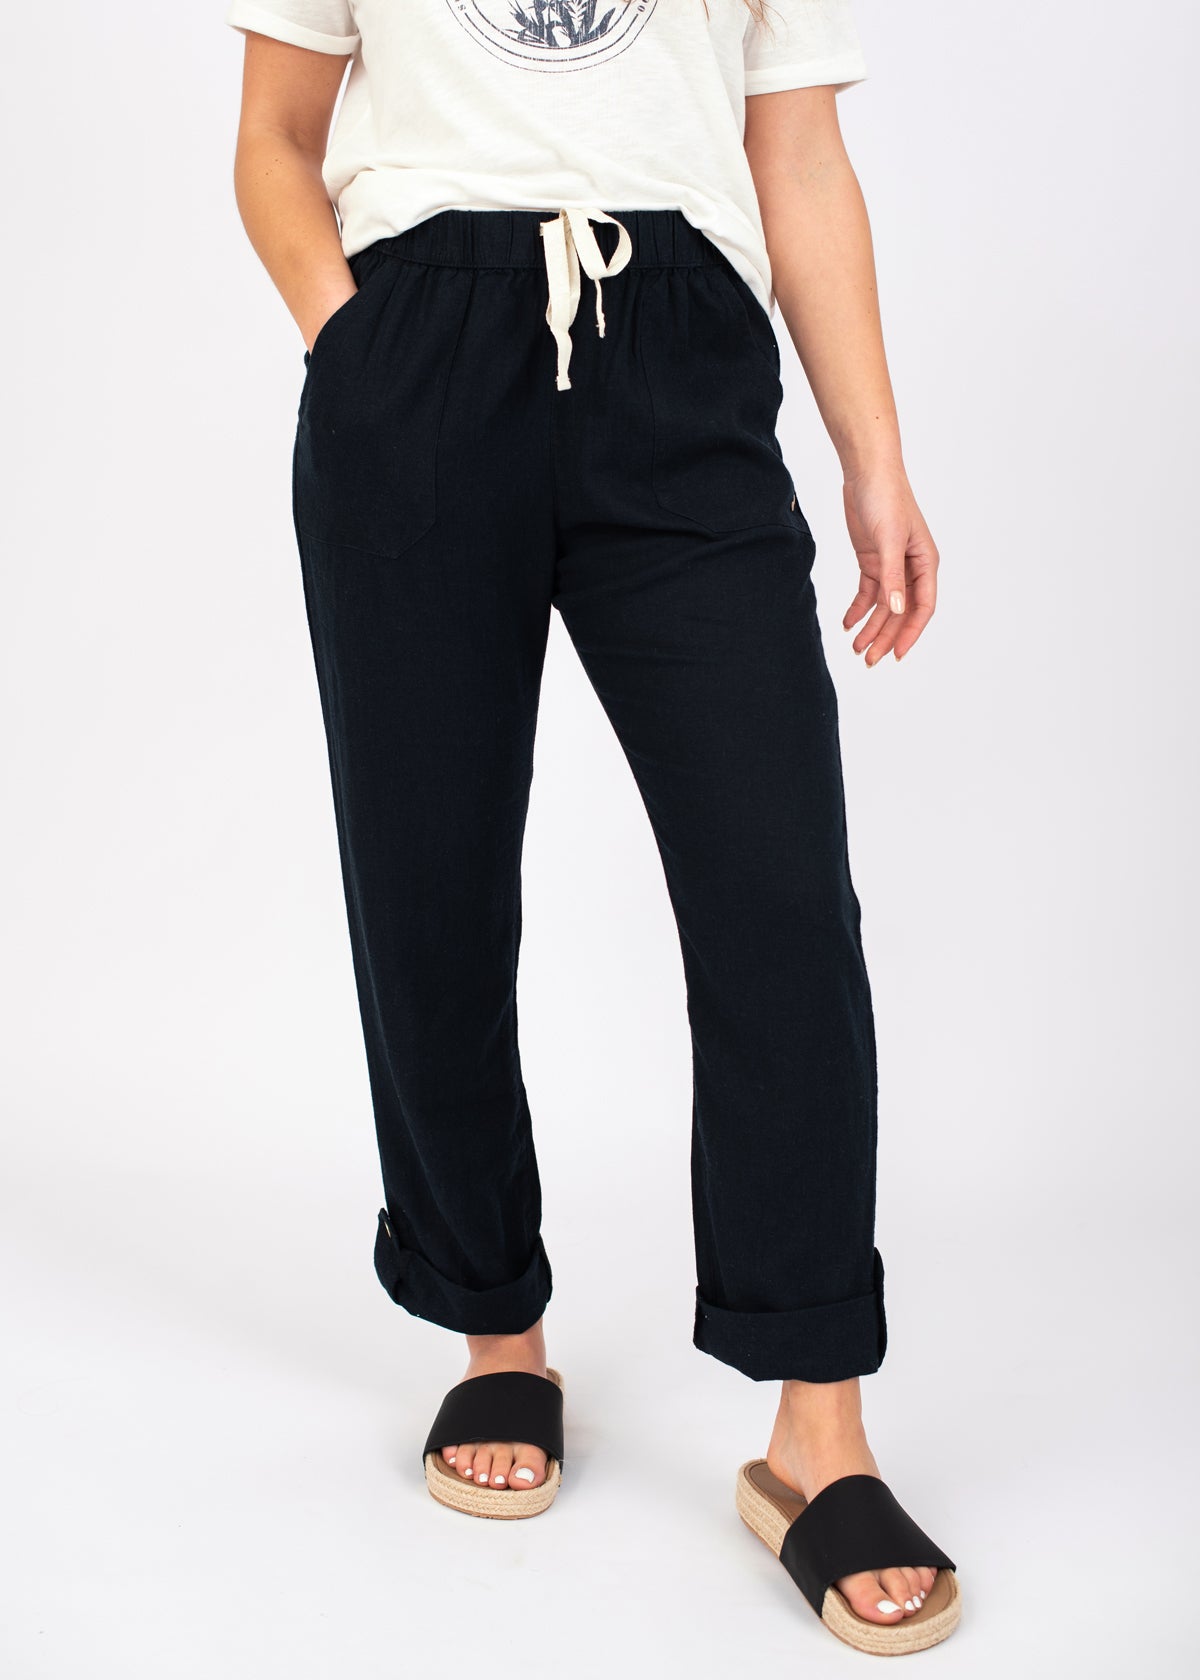 On The Seashore Linen Cargo Trousers by Roxy – The Beach Boutique